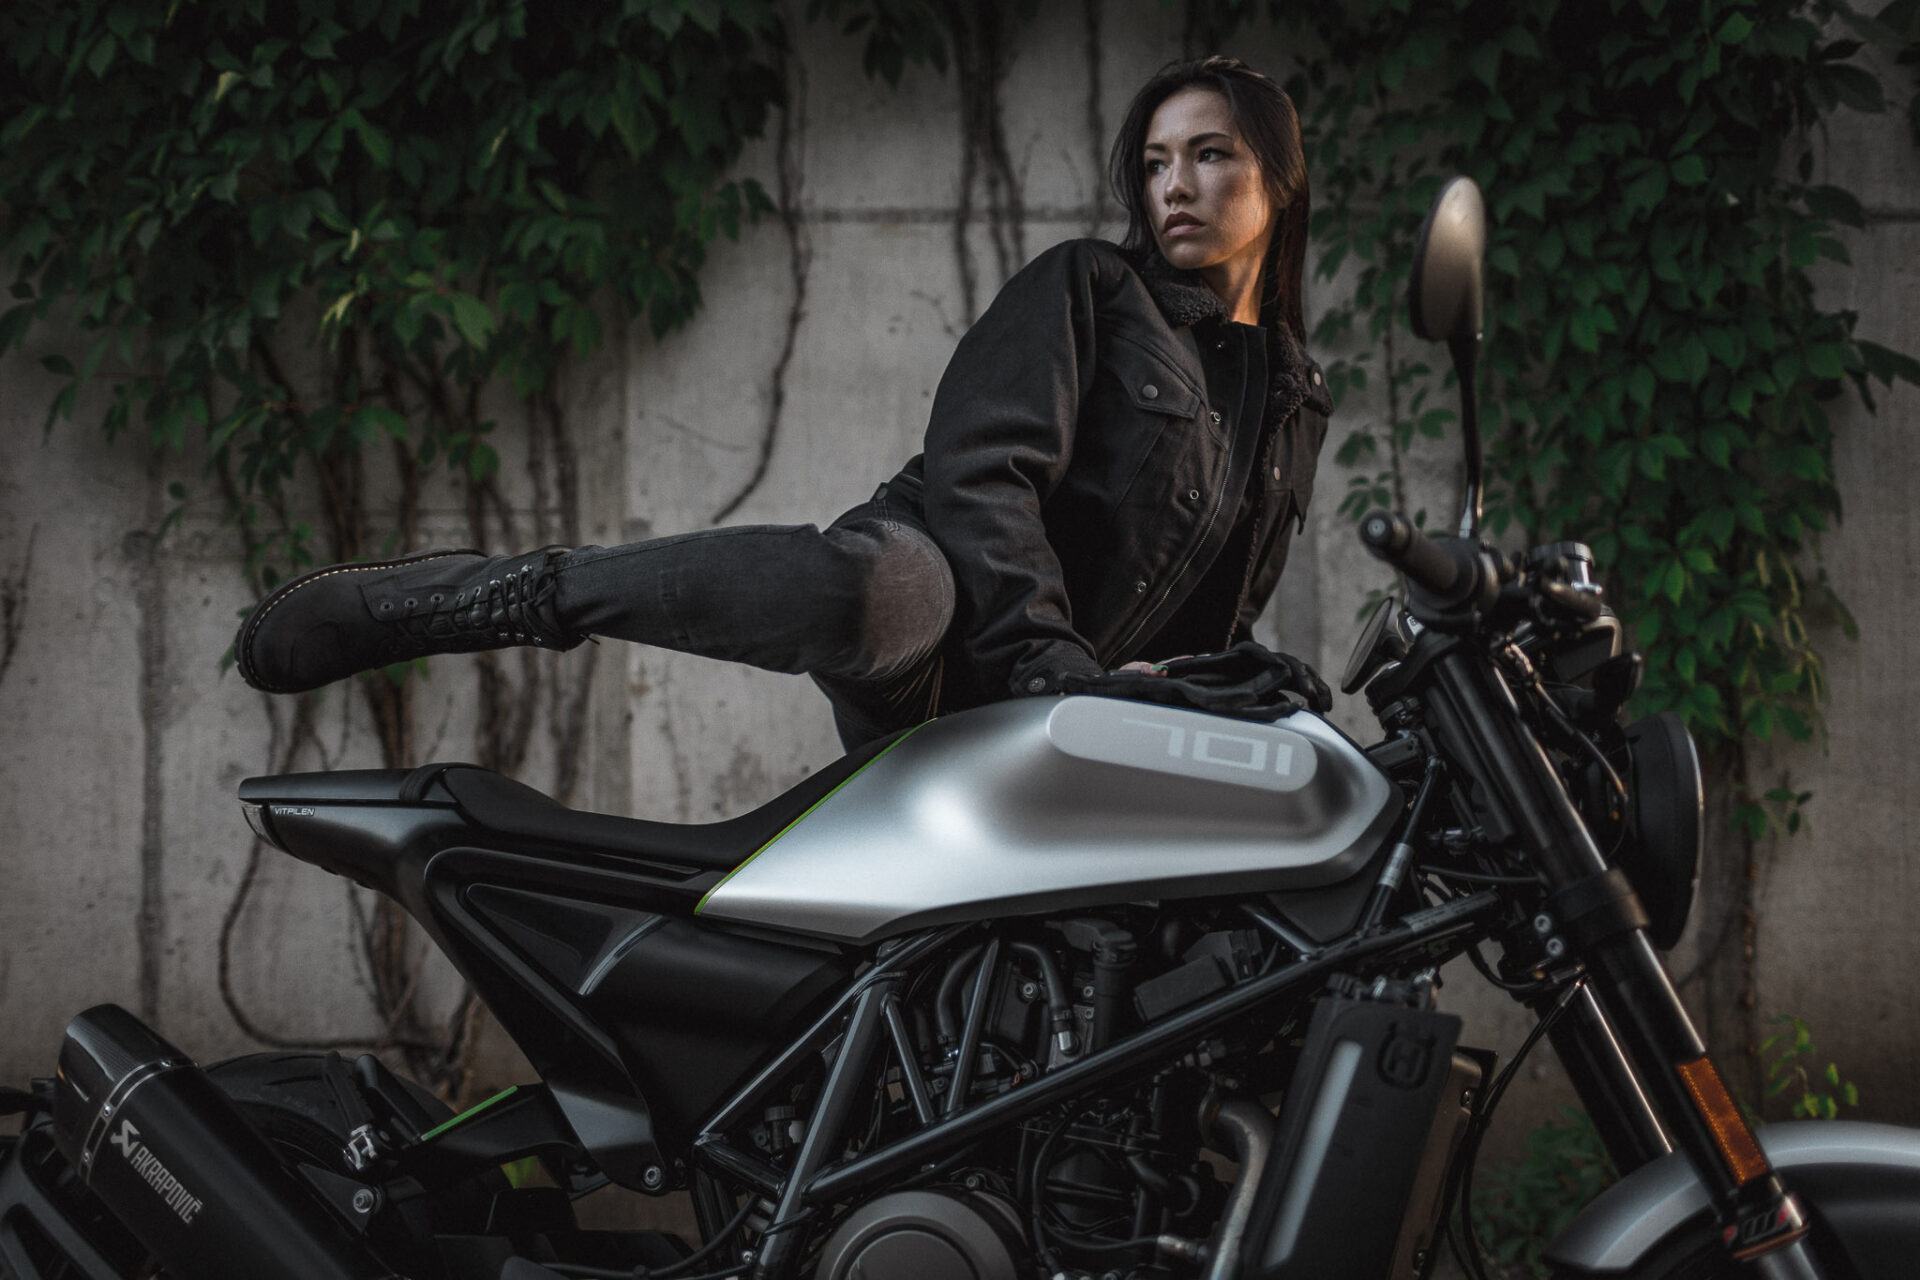 Motorcycle Pants for Women  Riding Pants With Style & Function